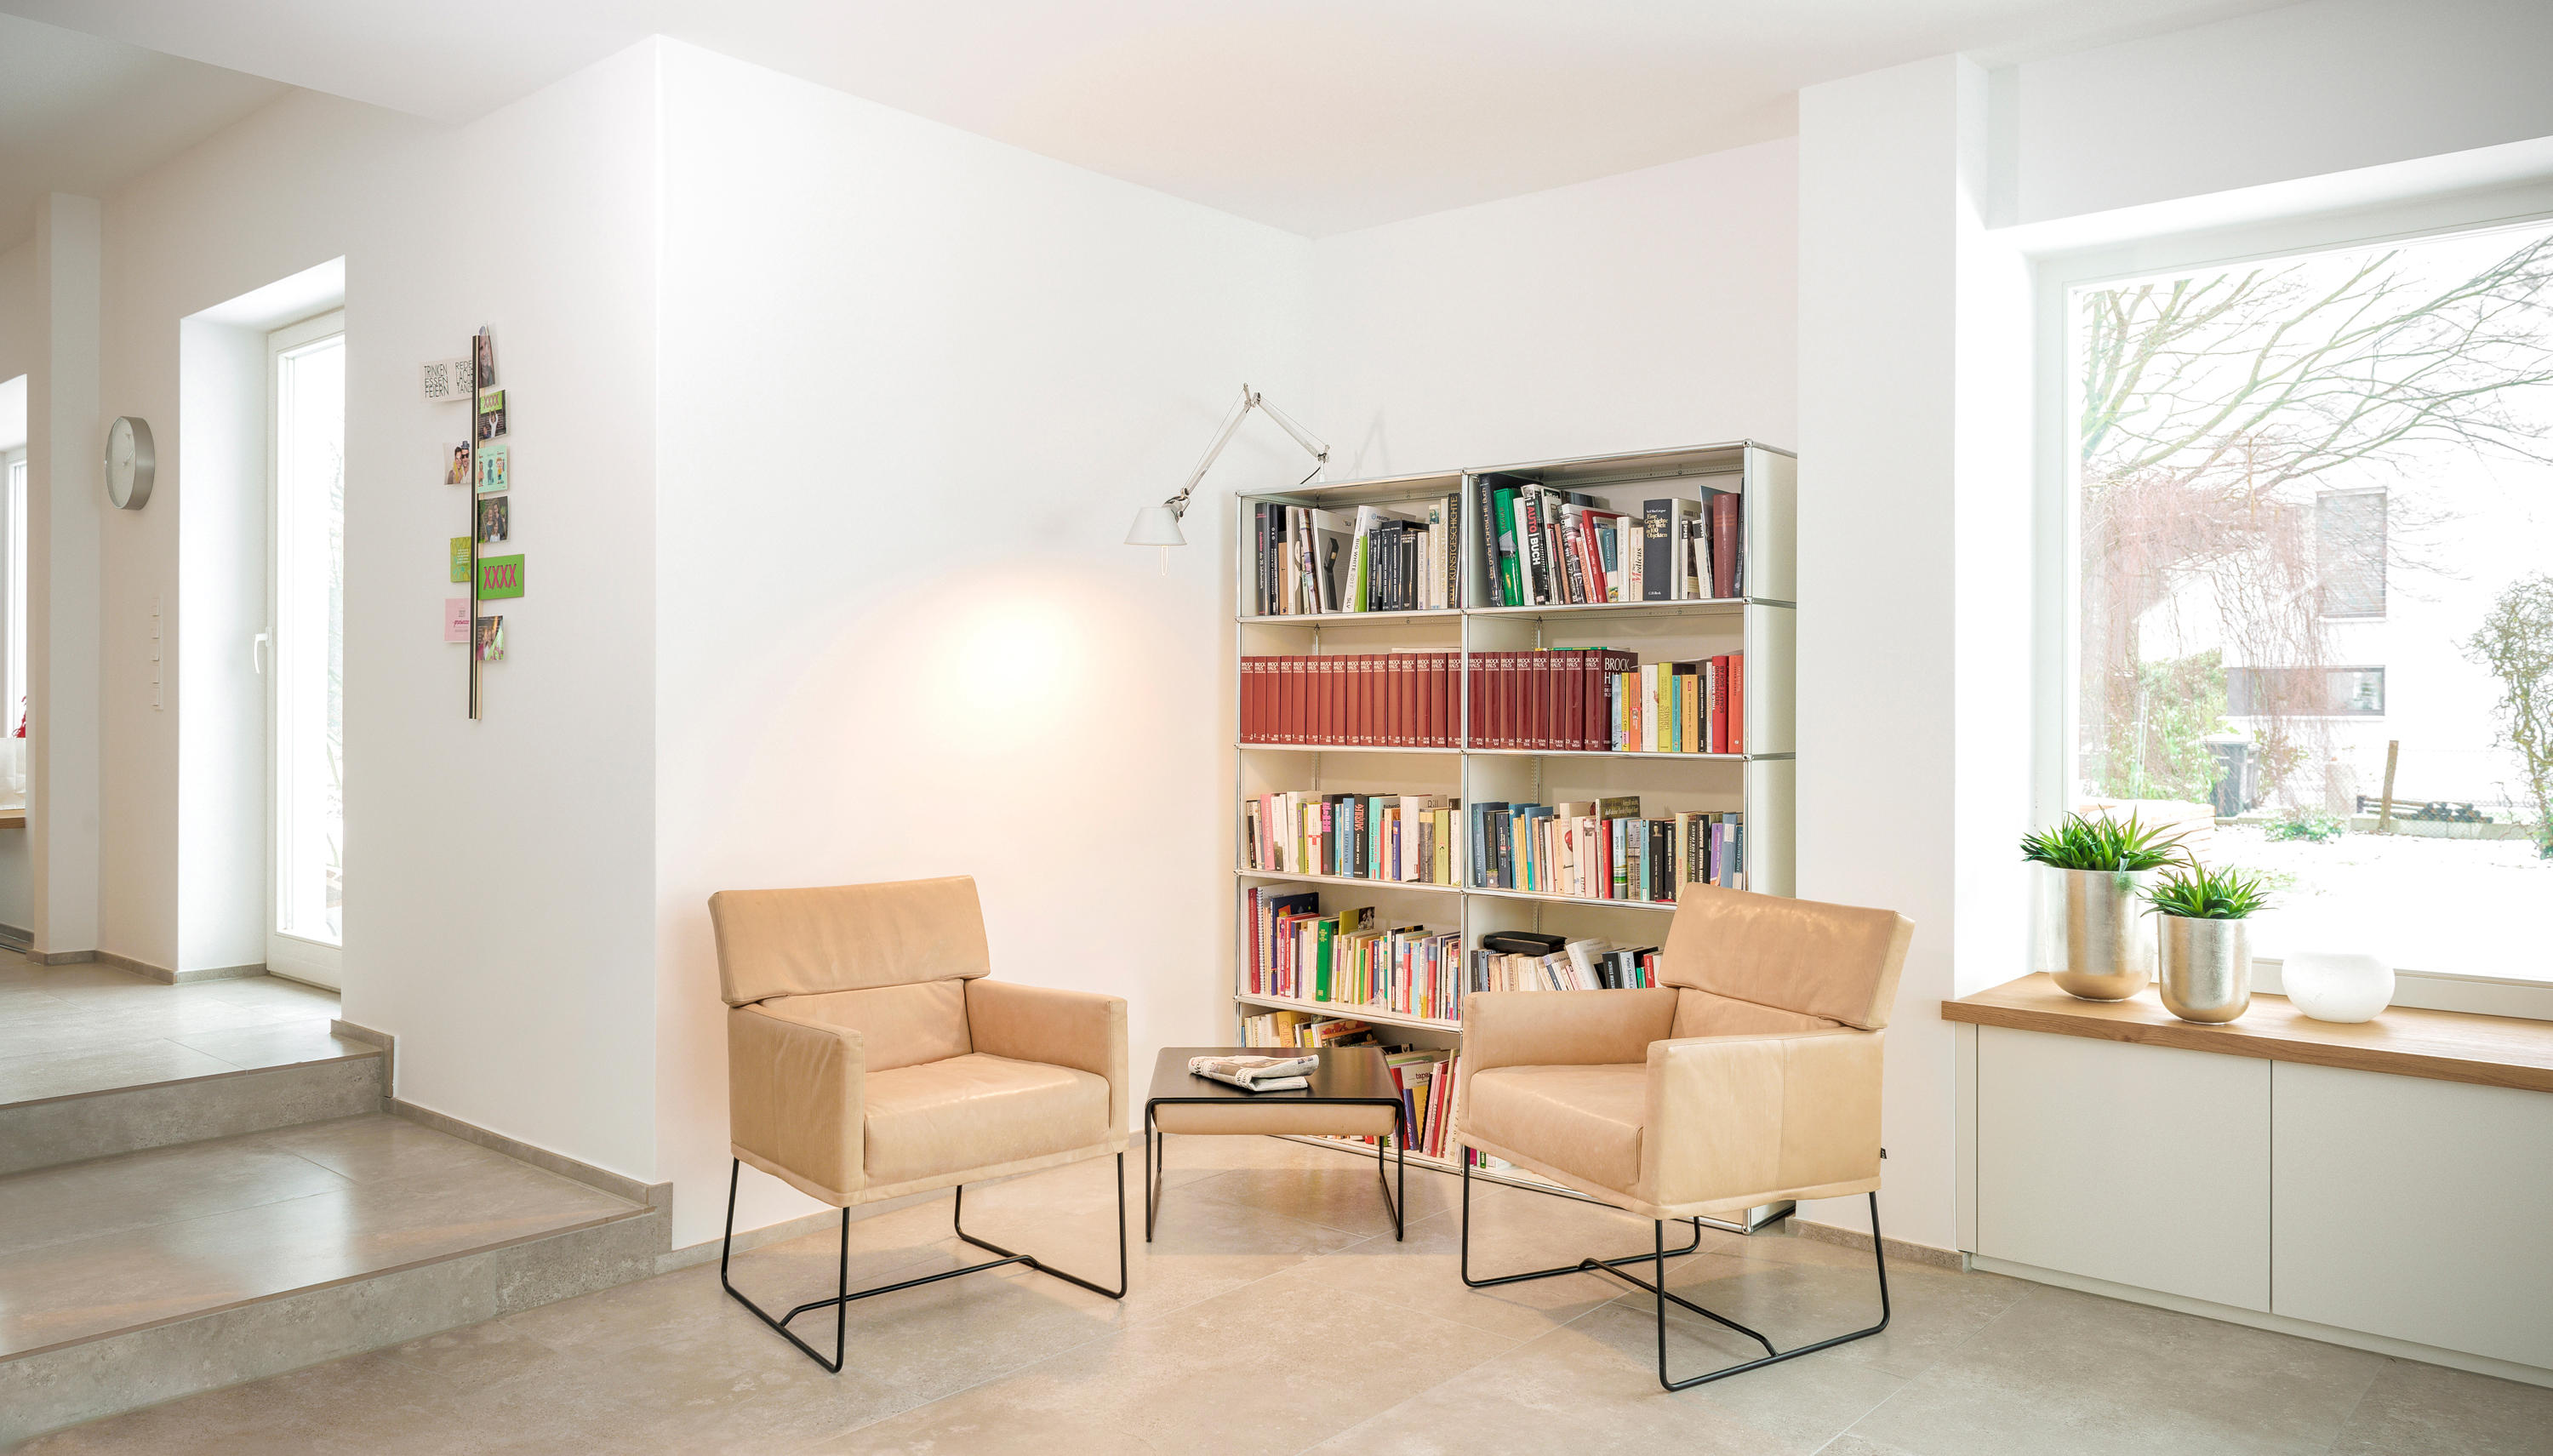 CAAL Chairs by Steven Schilte for KFF